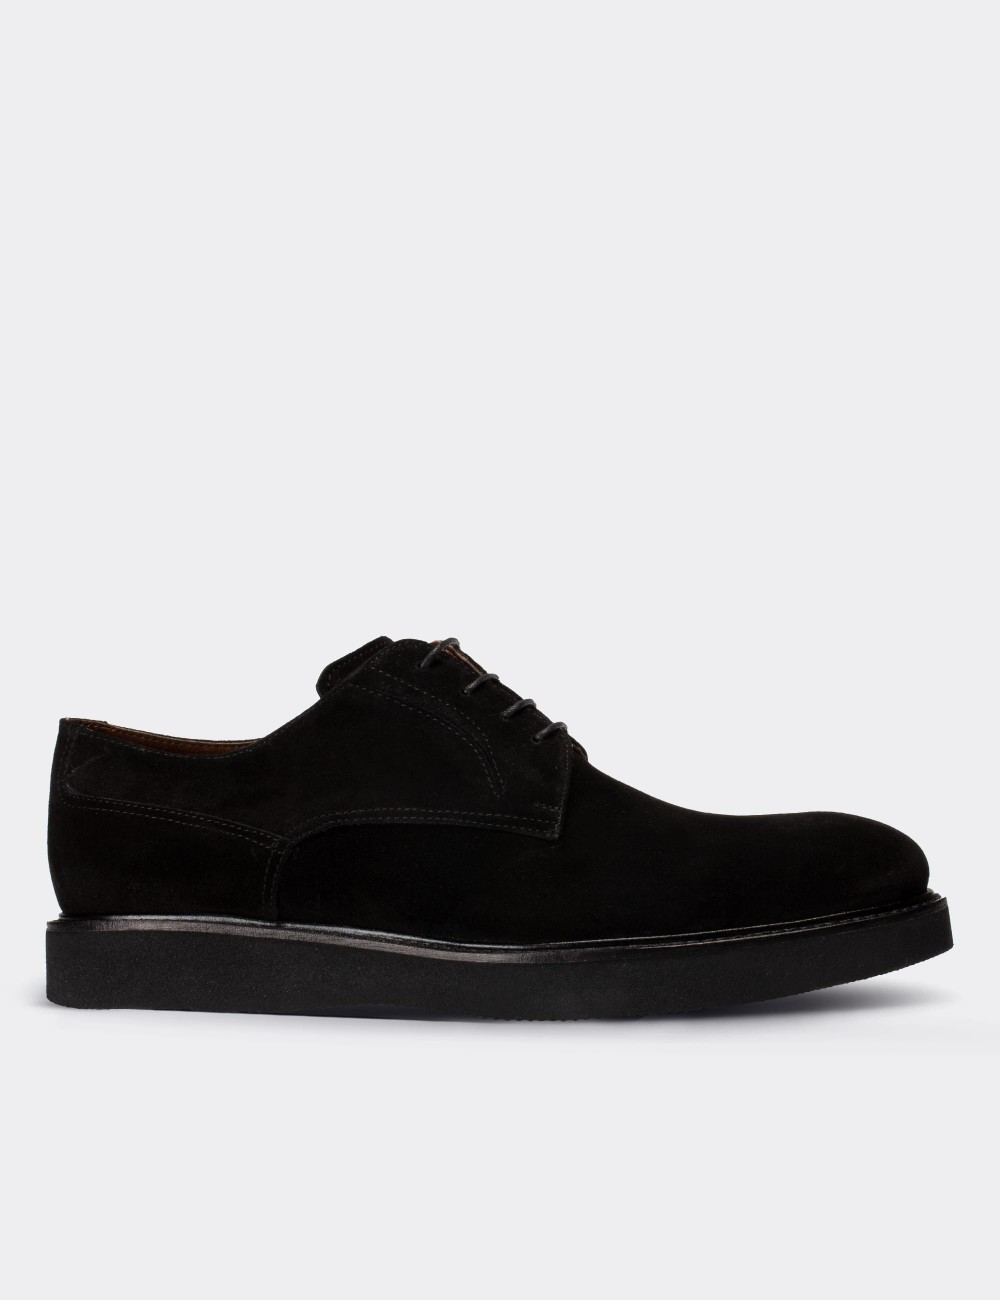 Black Suede Leather Lace-up Shoes - 01294MSYHE22